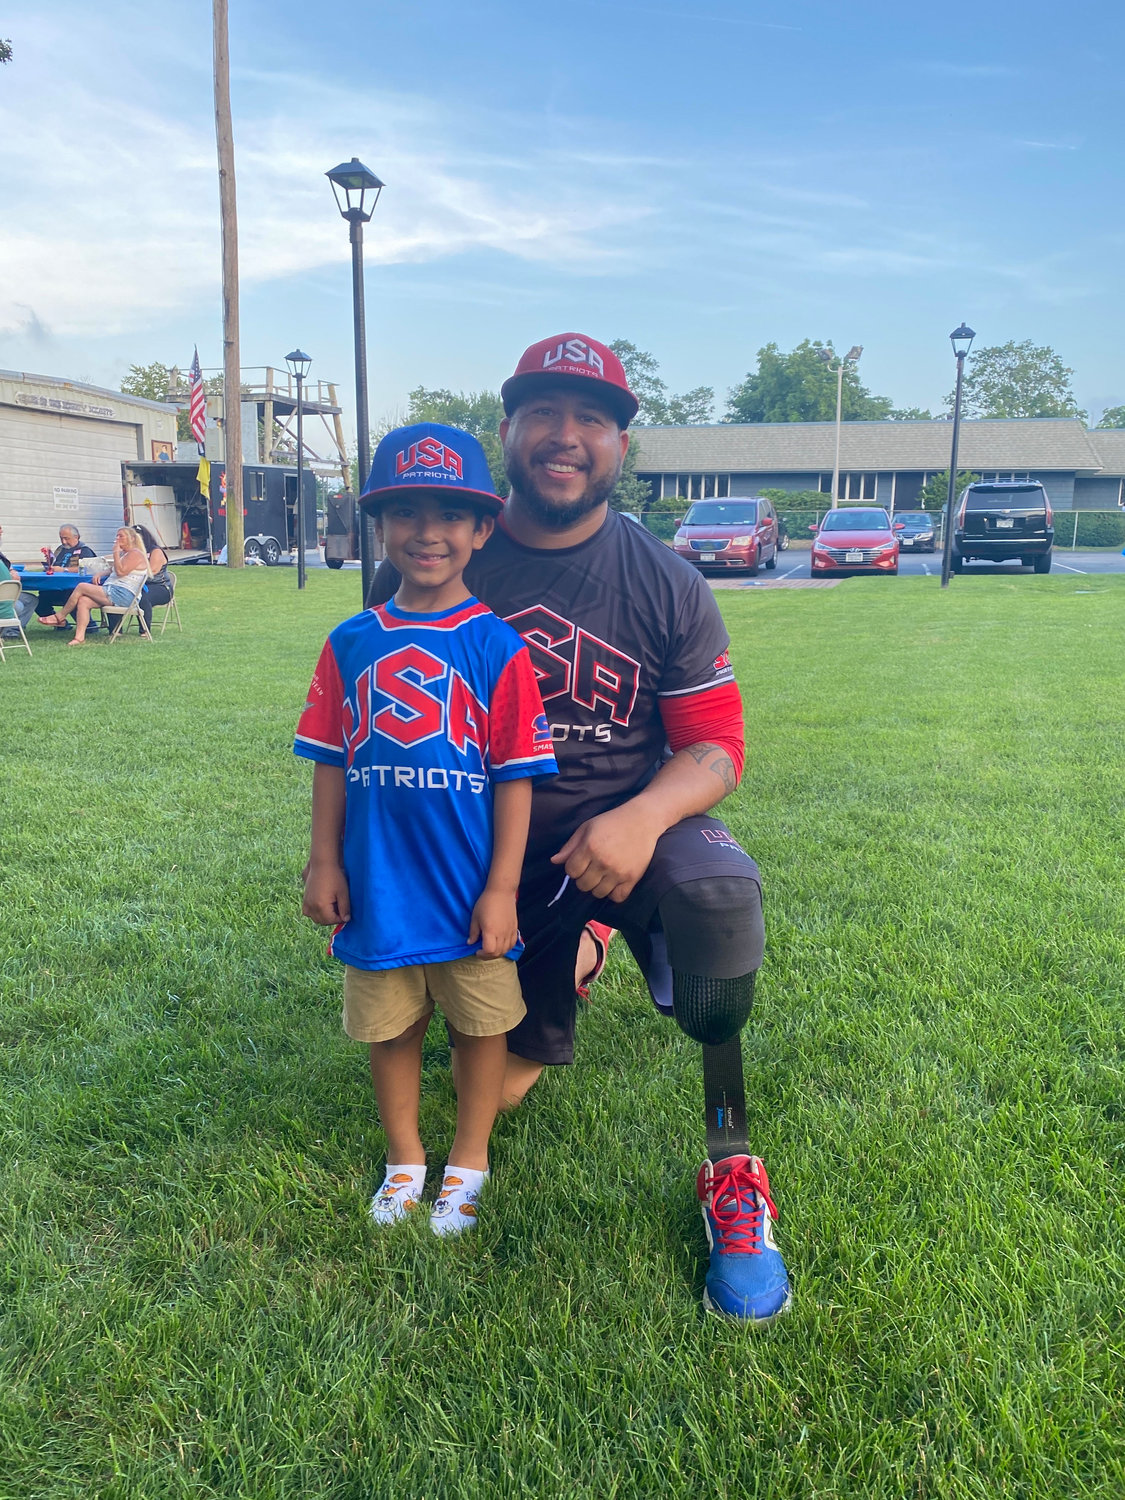 Player Saul Monroy (right) and his son Jayden. Monroy made the base hit that scored the USA Patriots the win.  Monroy is from El Paso, Texas.